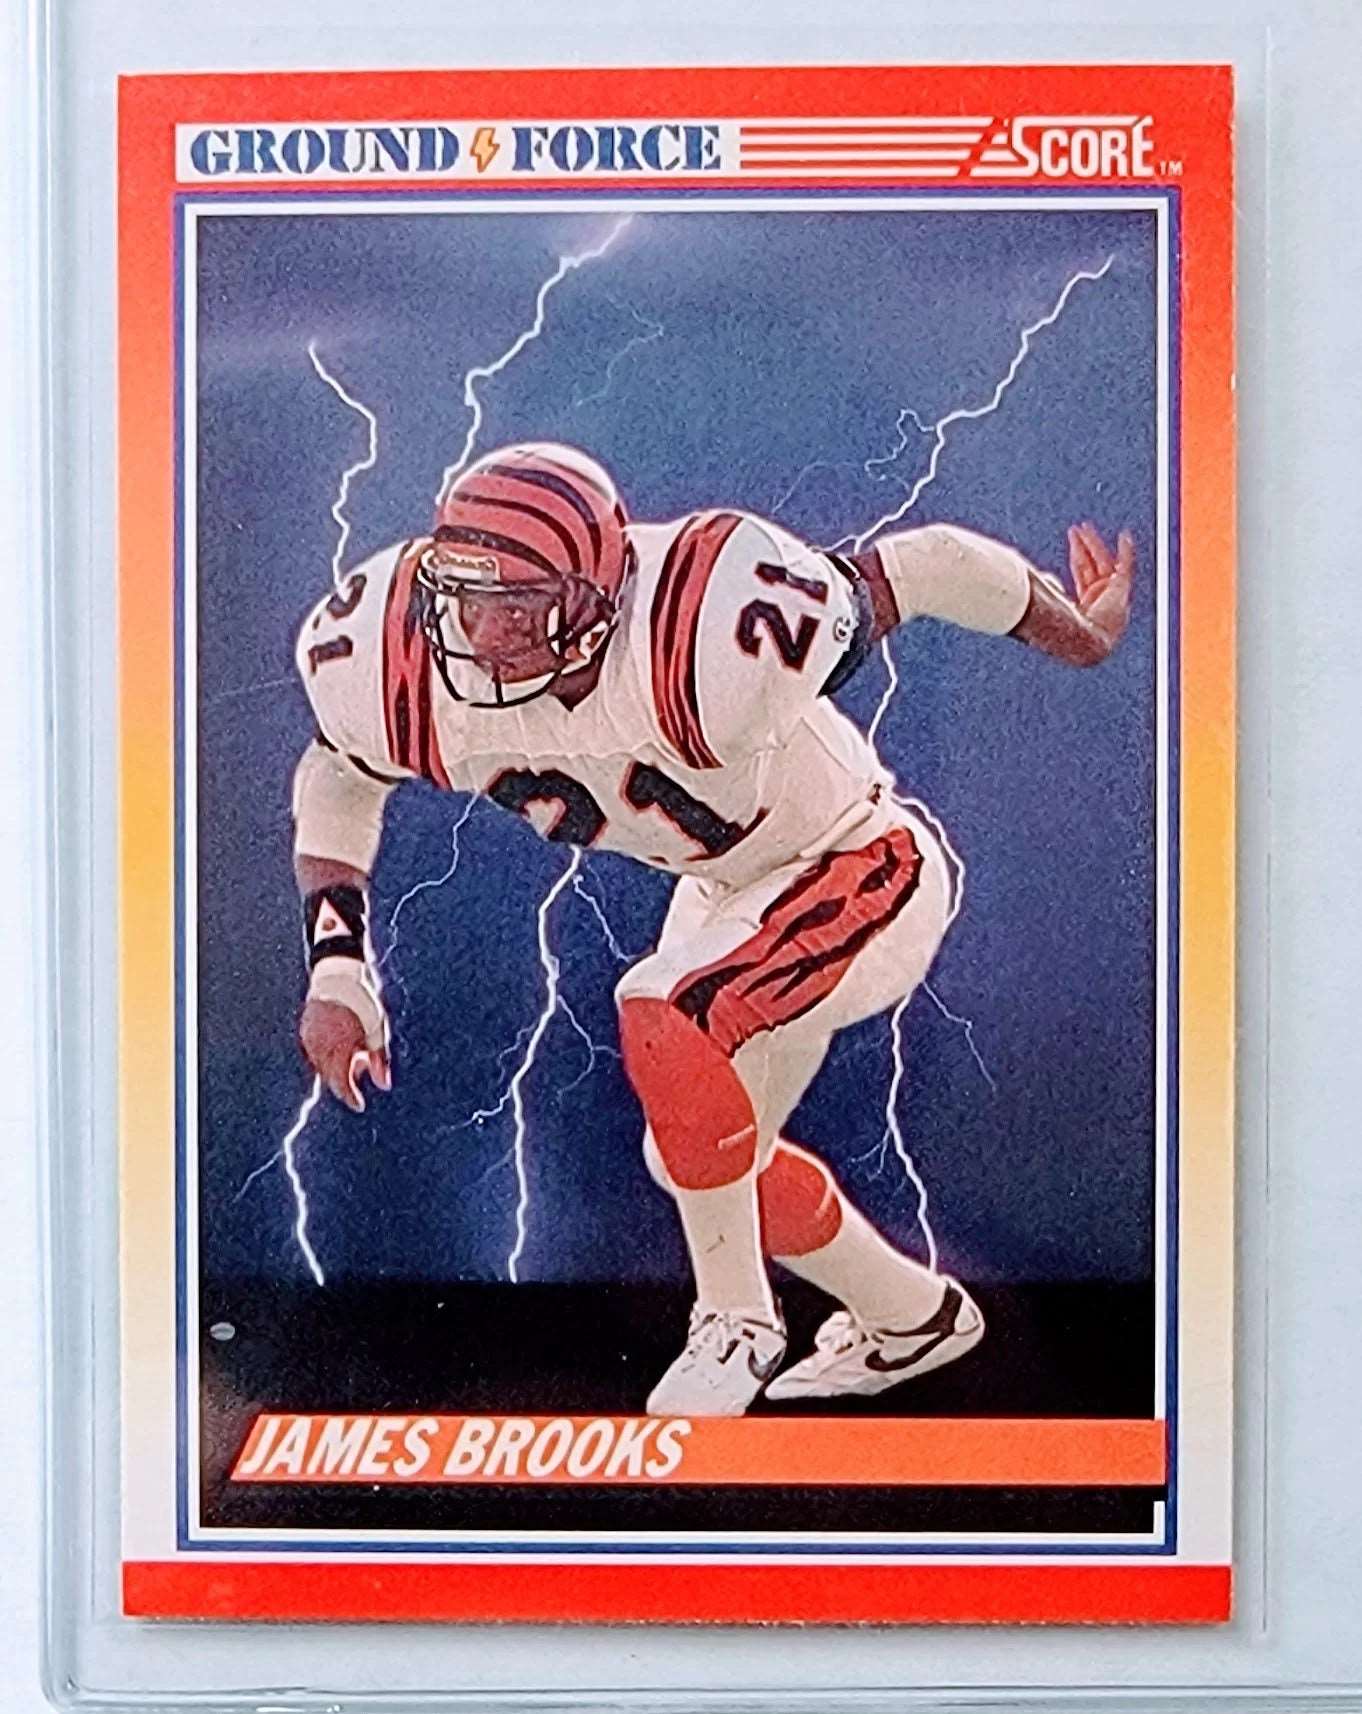 1990 Score James Brooks Ground Force Insert Football Card AVM1 simple Xclusive Collectibles   